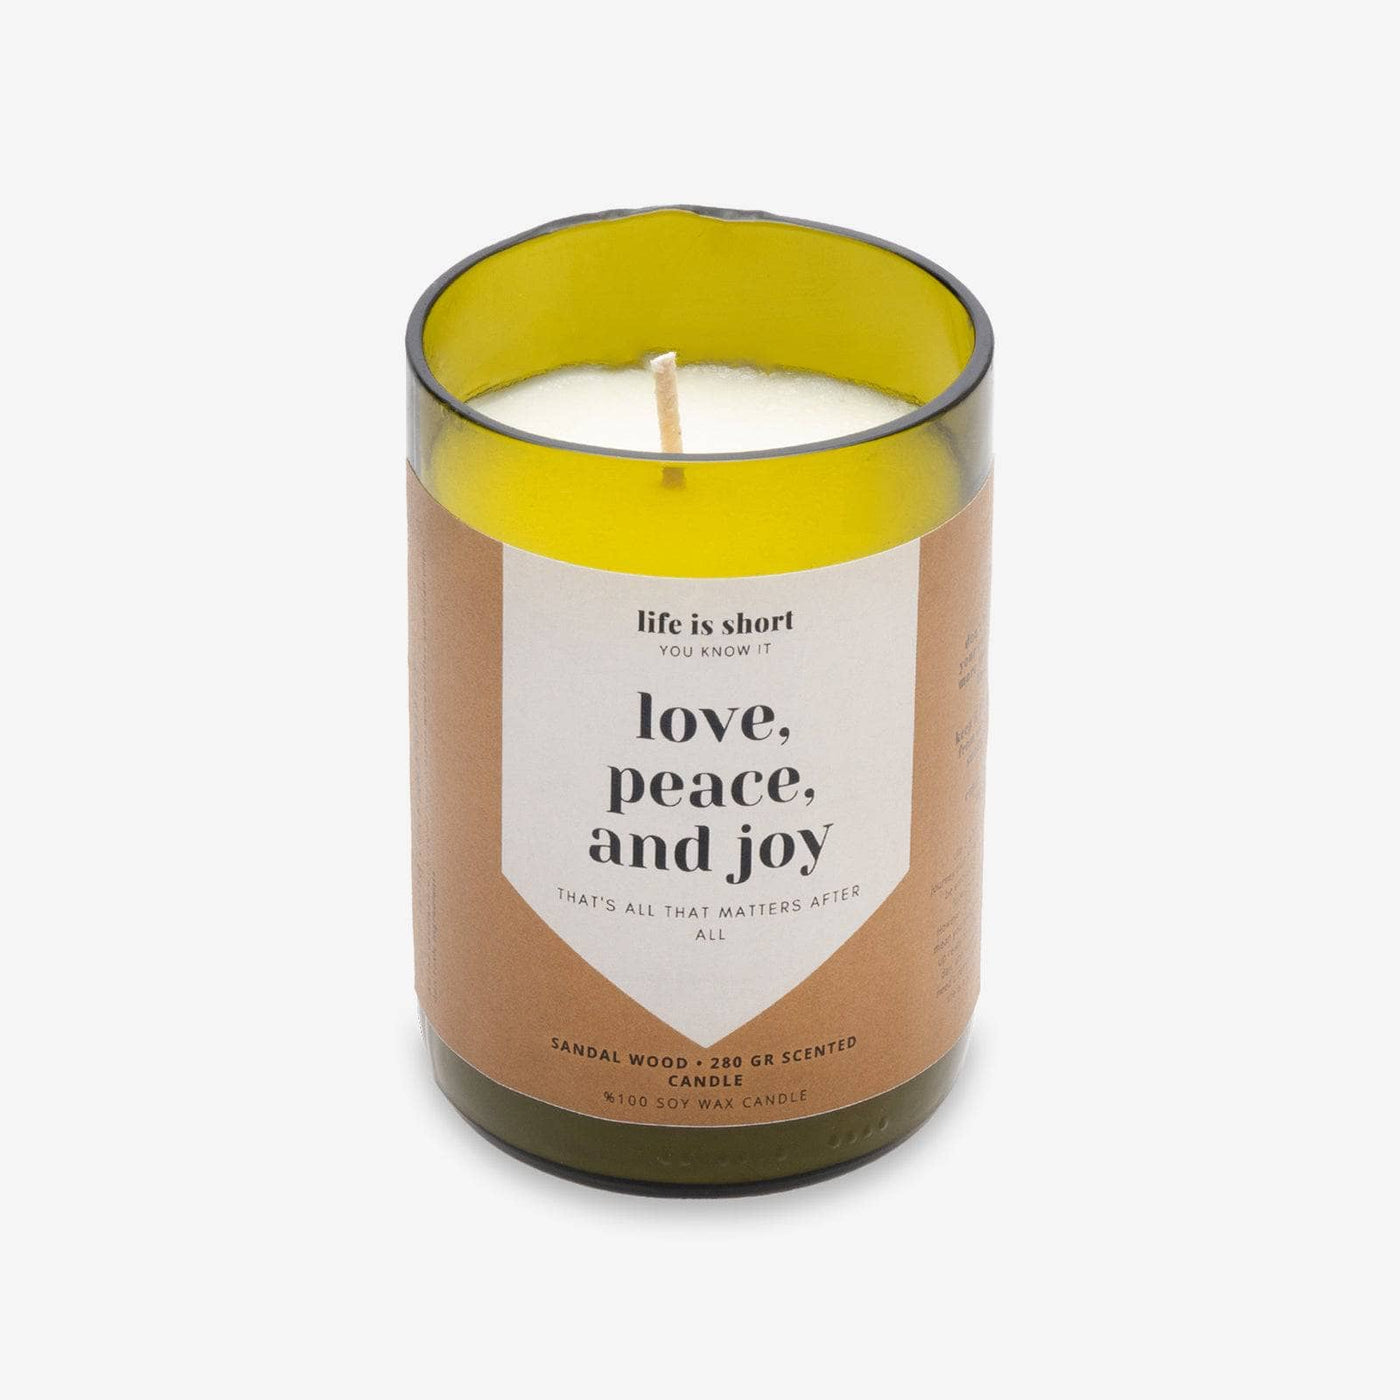 Love, Peace and Joy Soy Wax Candle, Amber, 285 g Candles sazy.com